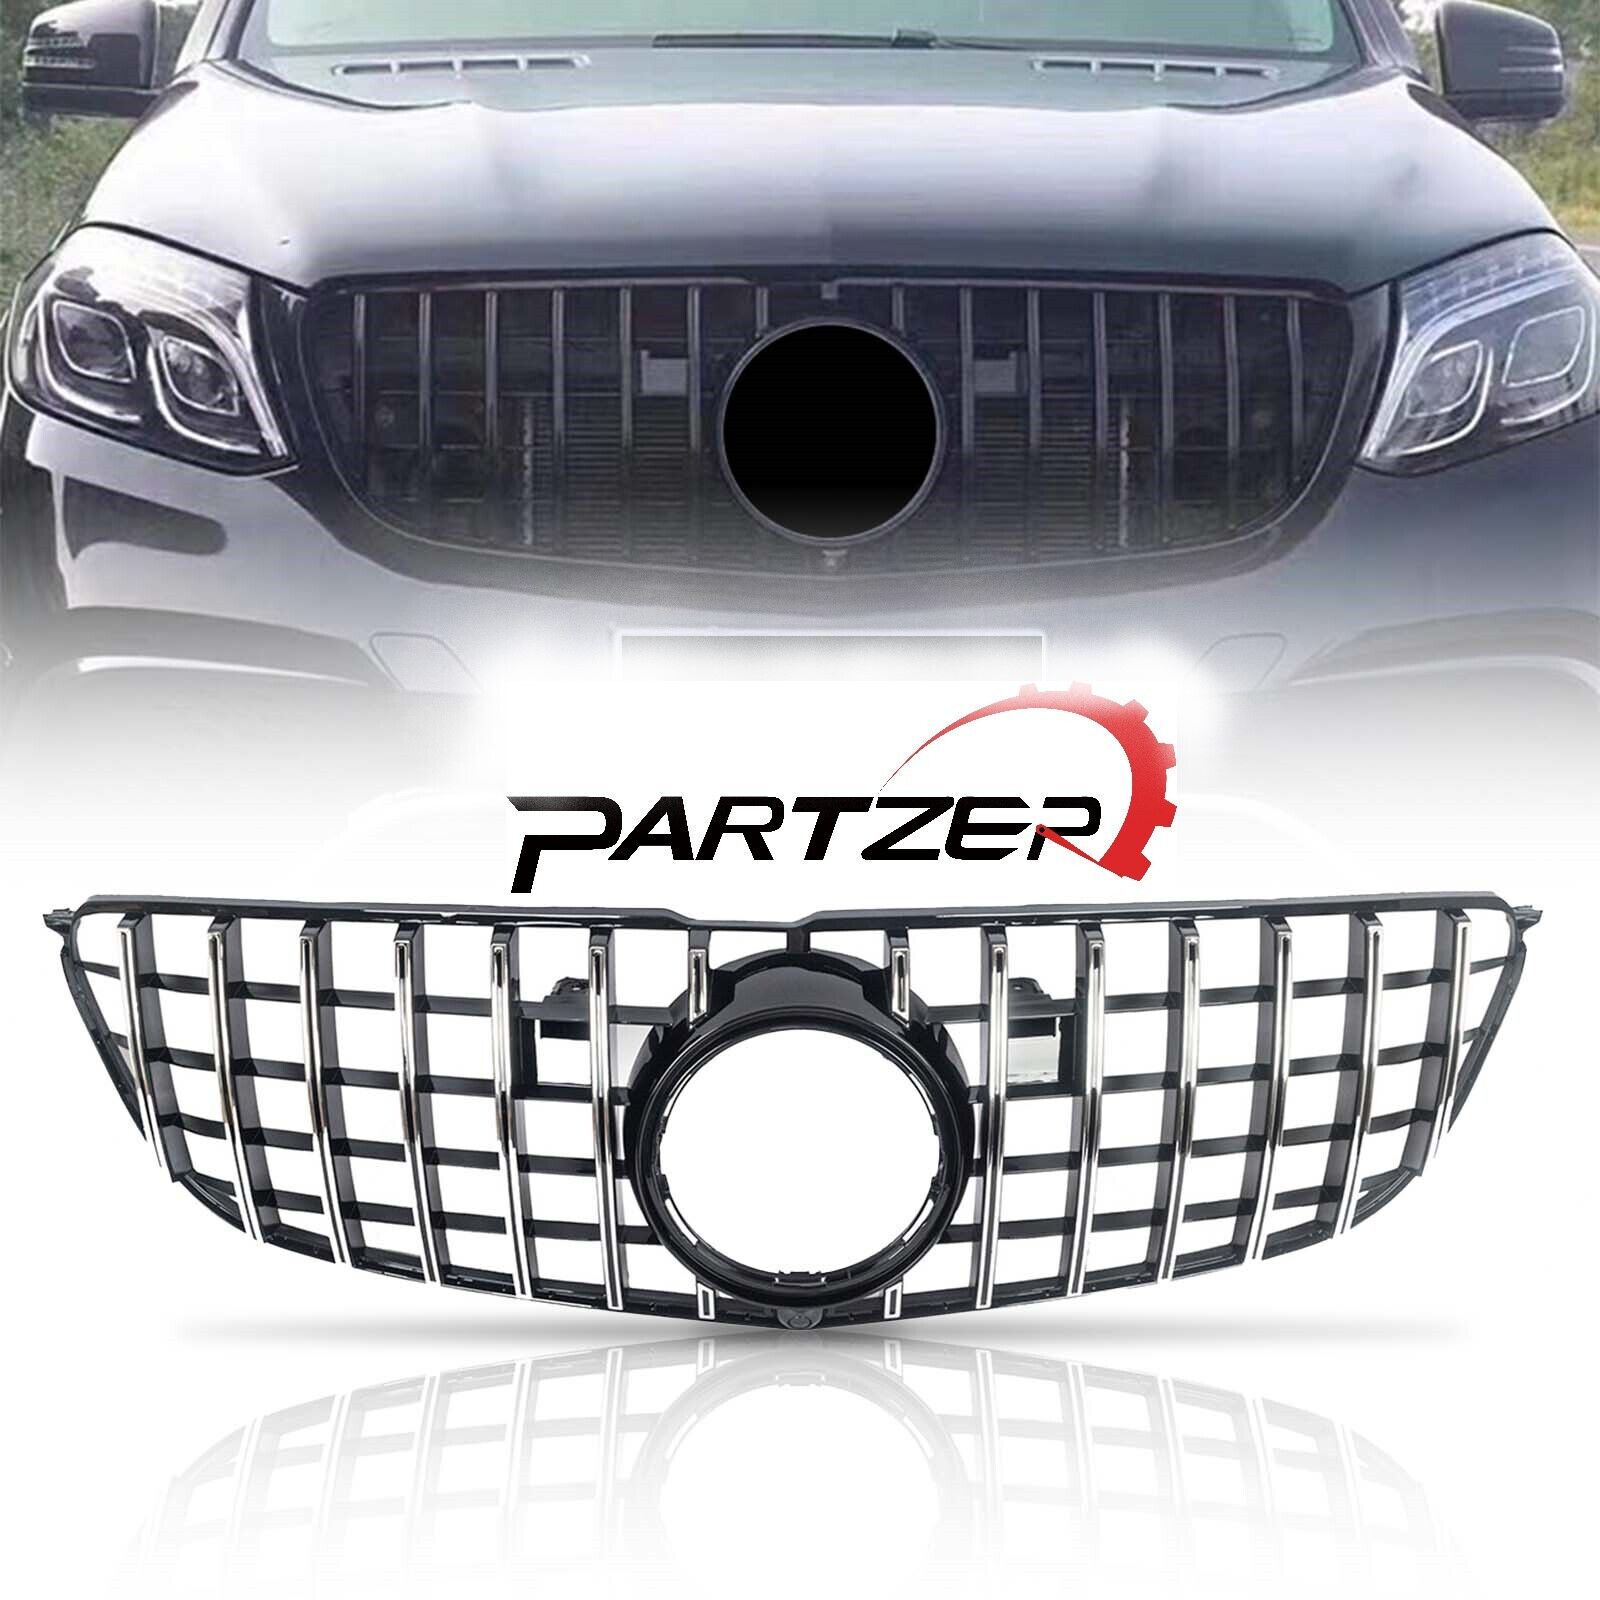 FOR 2016-2019 MERCEDES-BENZ X166 GLS-CLASS GLS450 GLS550 FRONT GRILLE GT GRILL